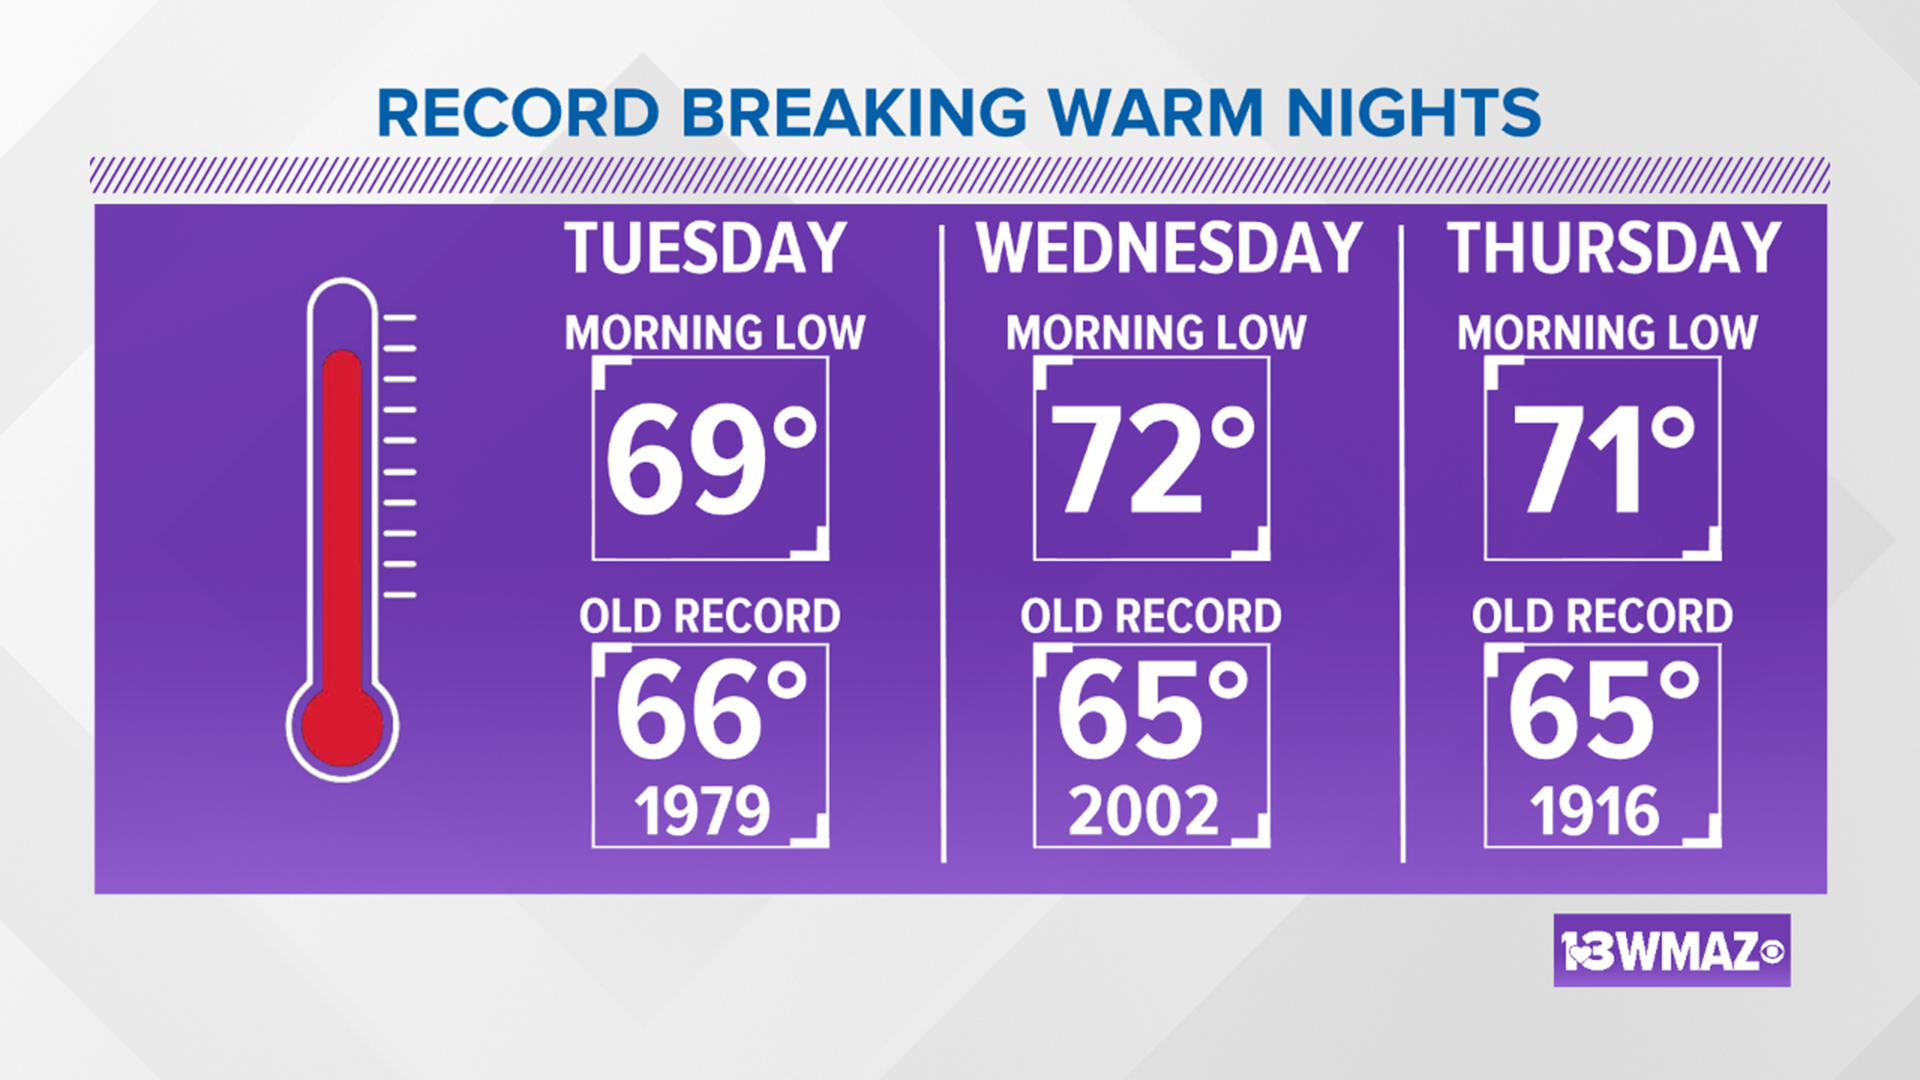 The nights have been incredibly warm for this time of year, breaking records by 3-7 degrees